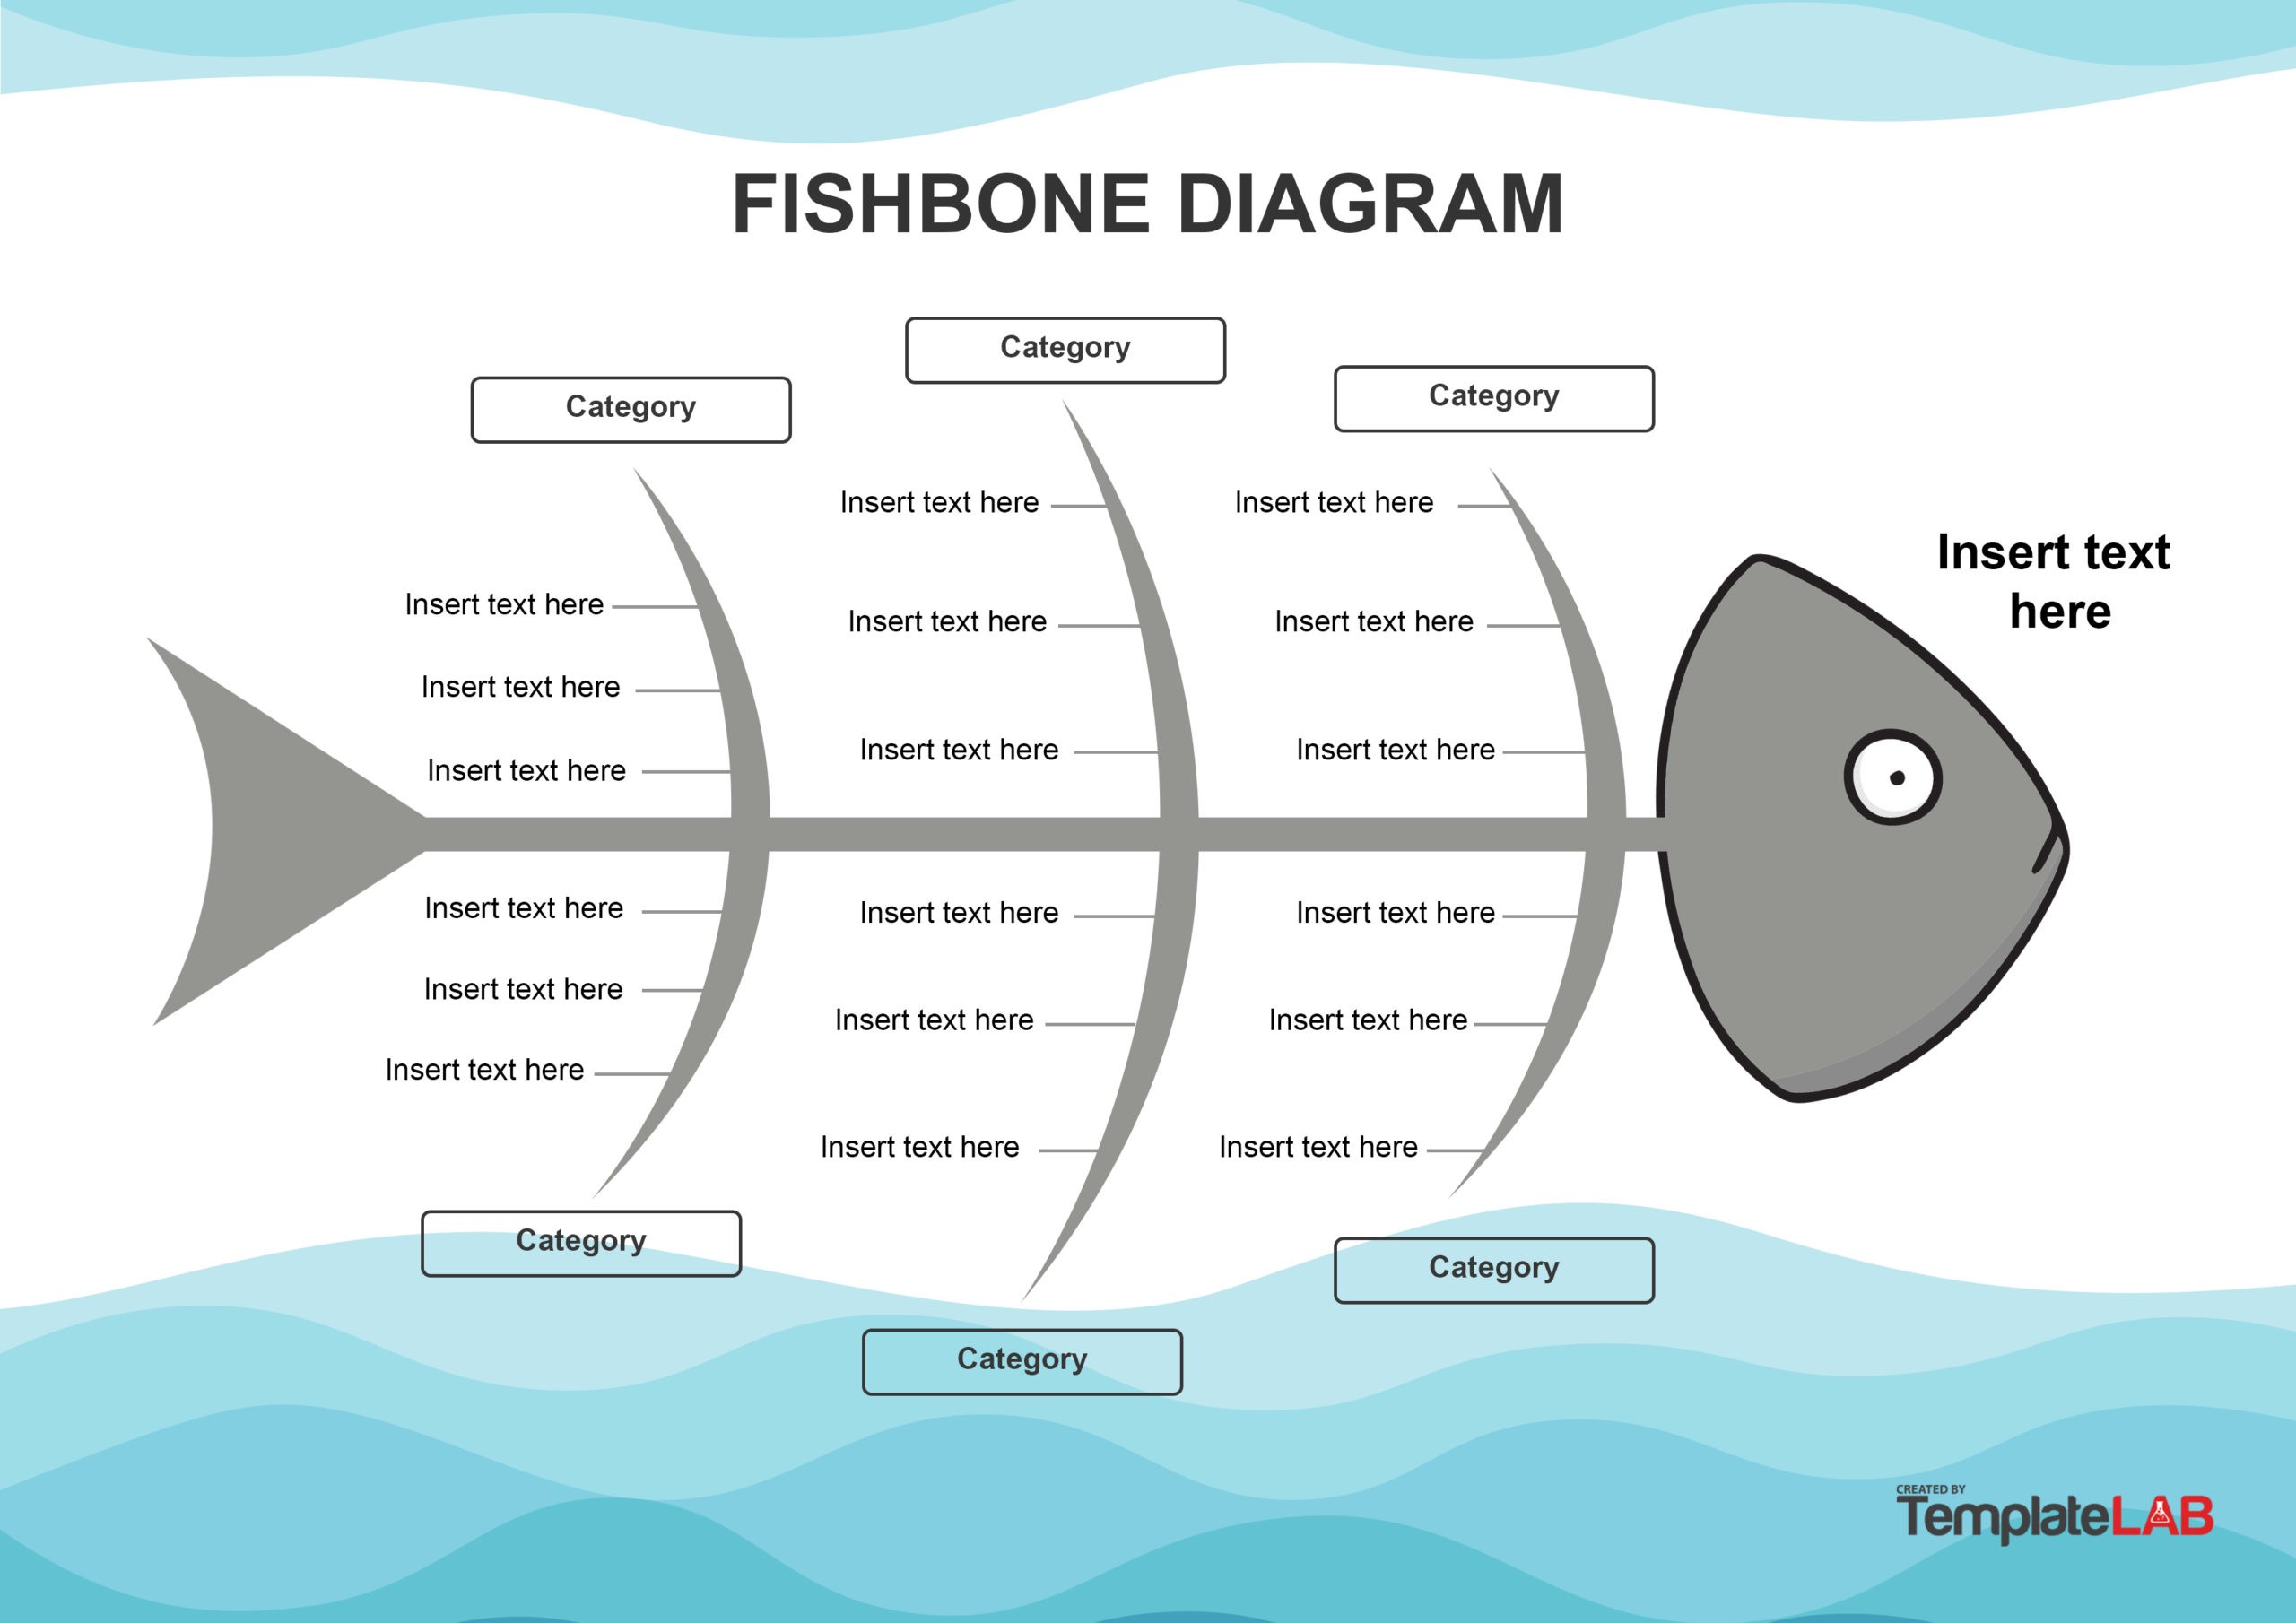 25 Great Fishbone Diagram Templates & Examples [Word, Excel, PPT]